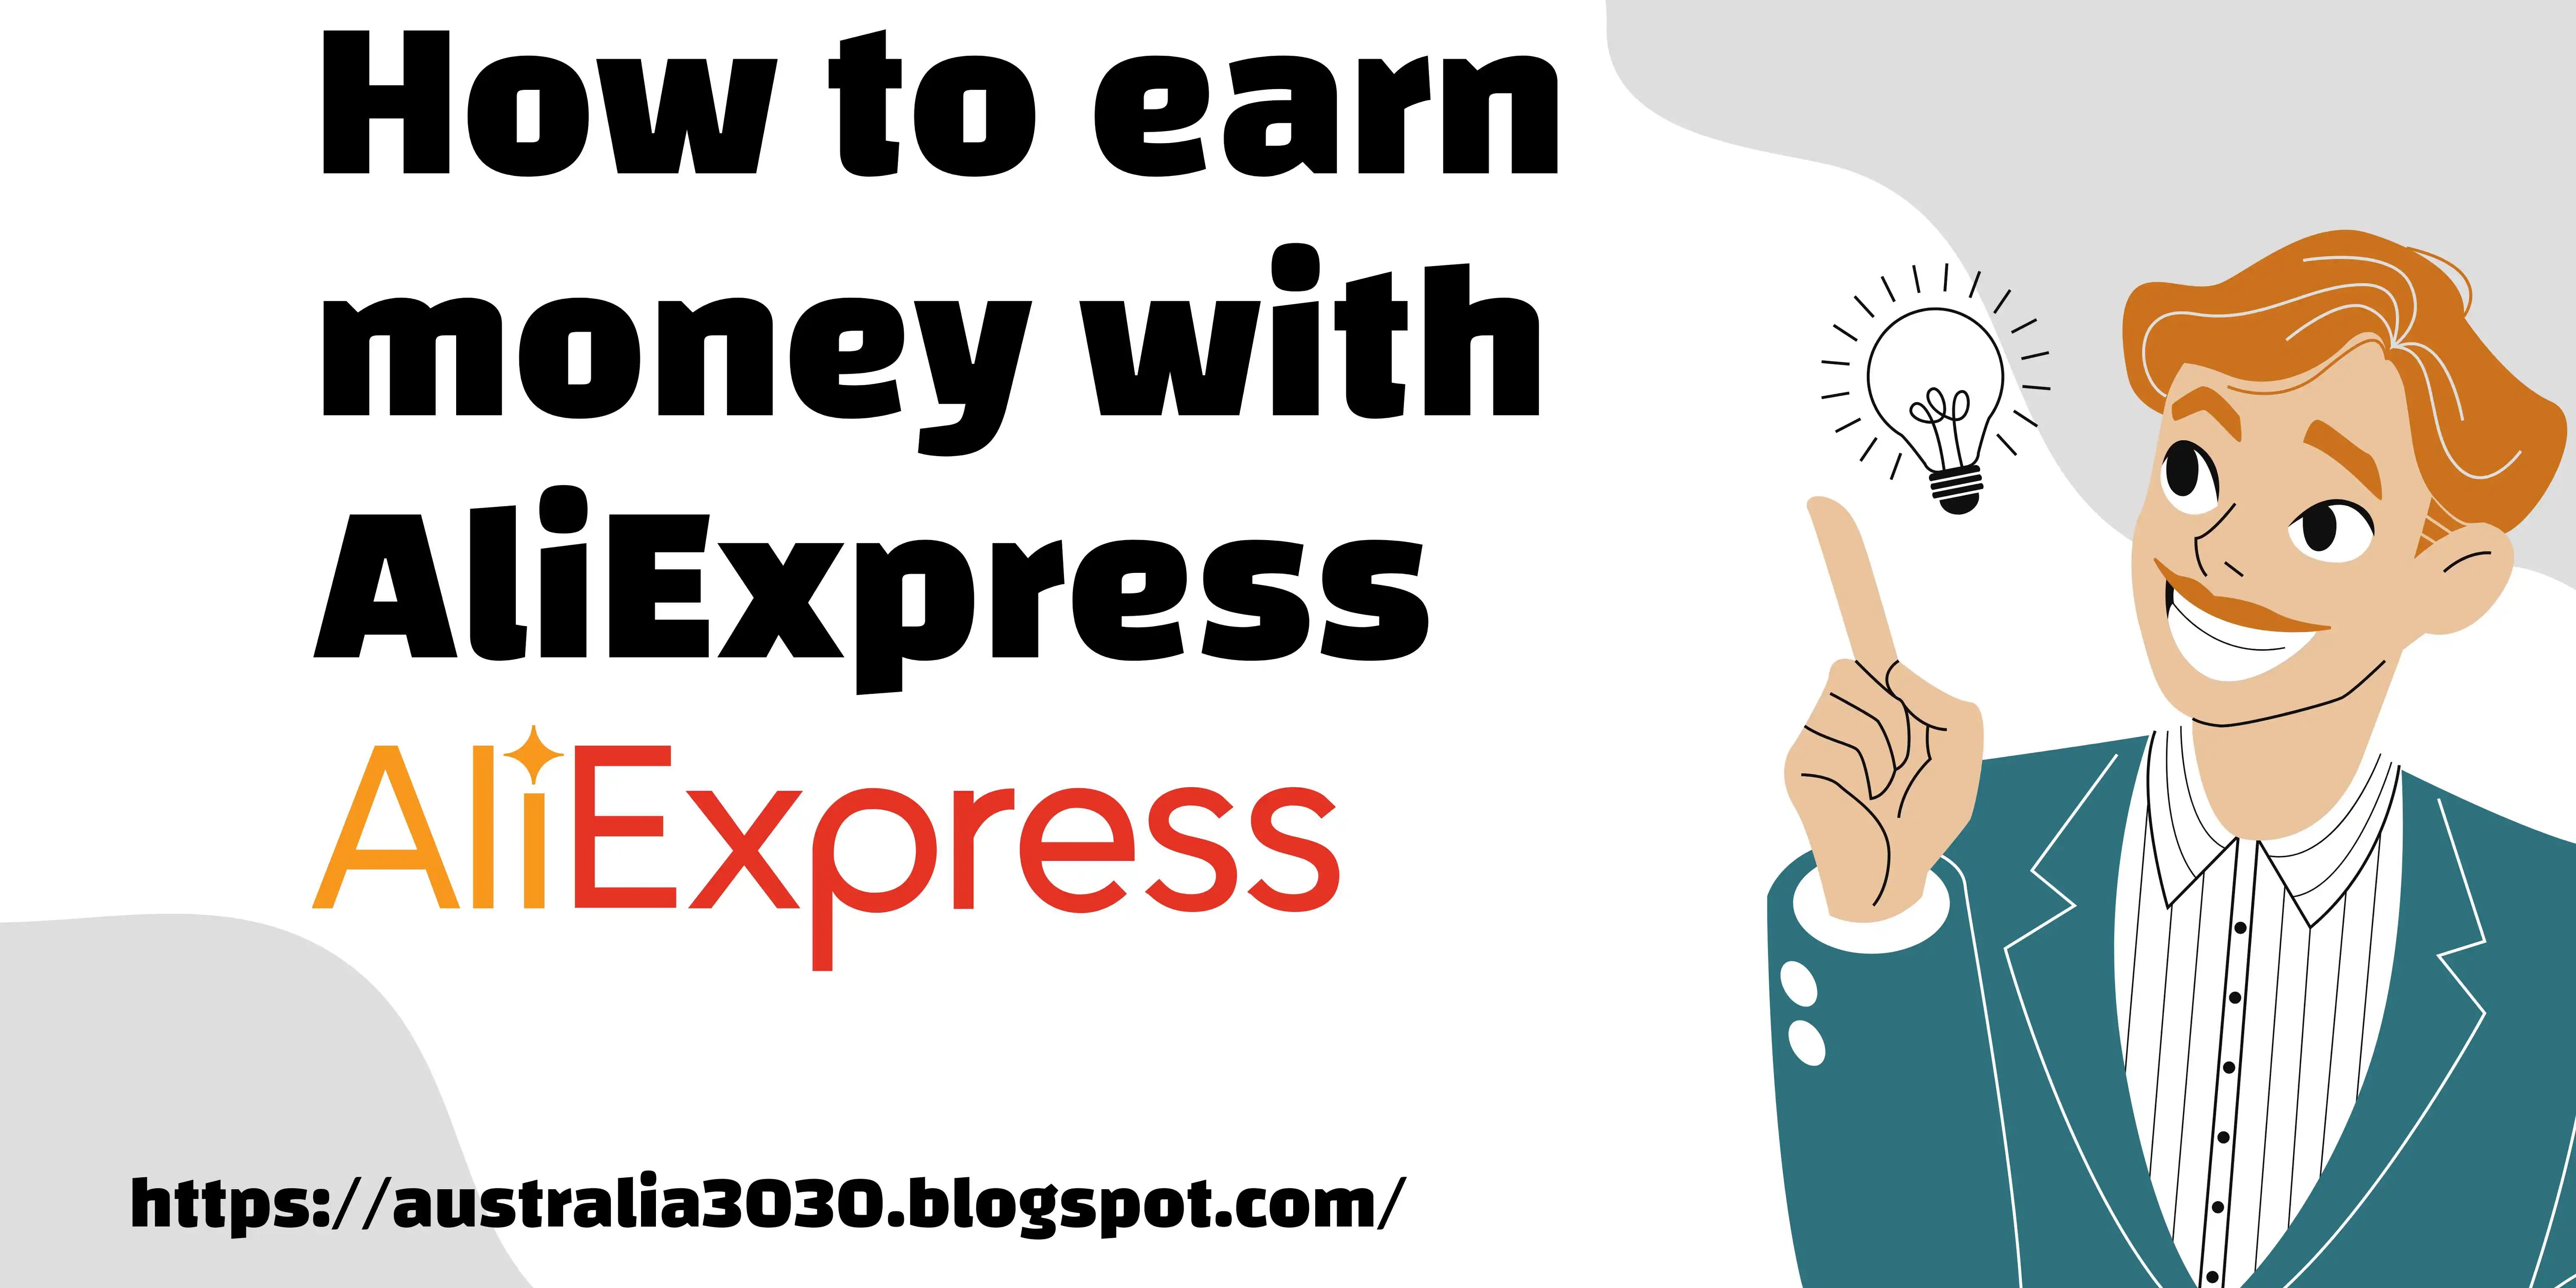 How to earn money with AliExpress